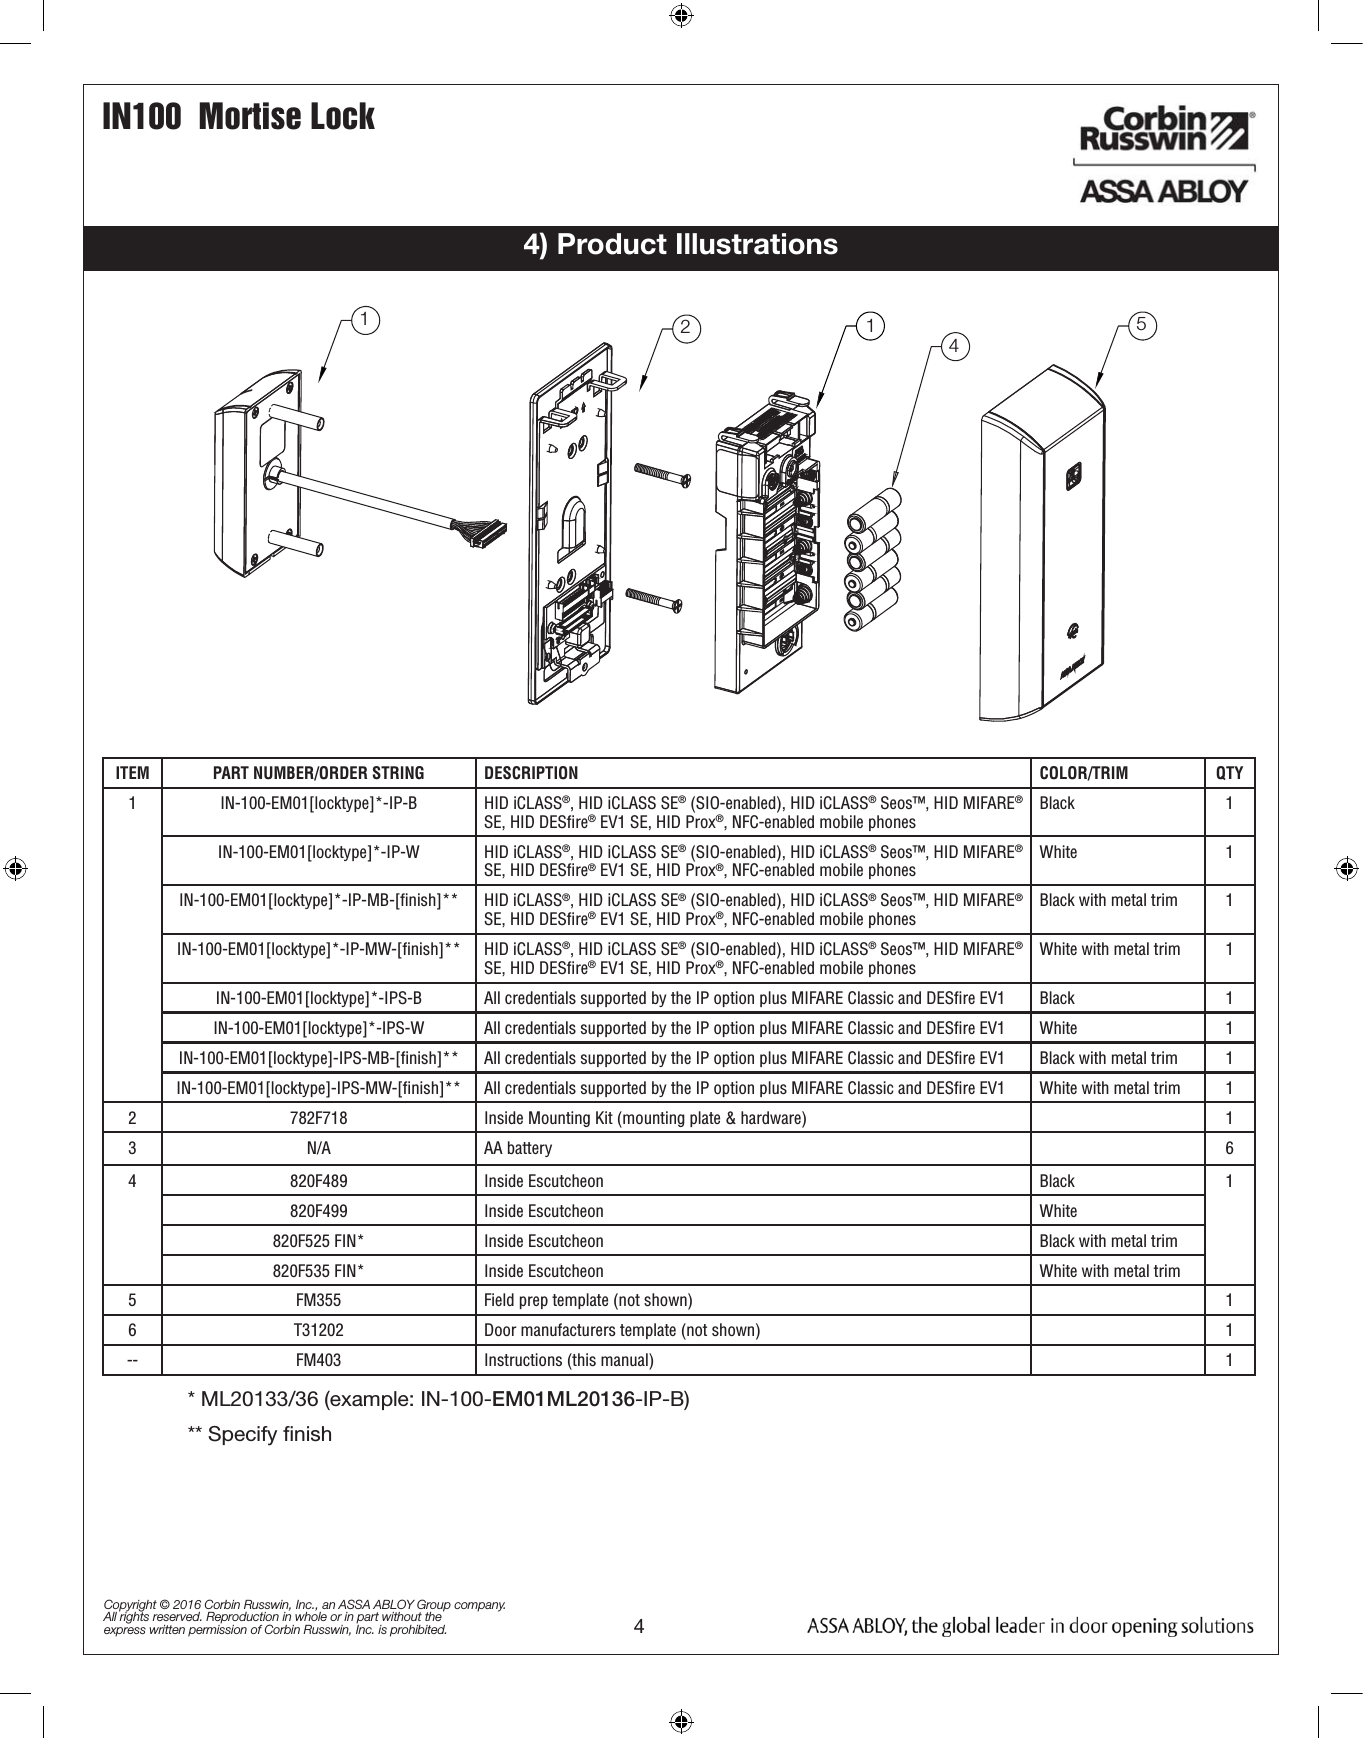 IN100  Mortise Lock4Copyright © 2016 Corbin Russwin, Inc., an ASSA ABLOY Group company. All rights reserved. Reproduction in whole or in part without the express written permission of Corbin Russwin, Inc. is prohibited.4) Product Illustrations** Specify ﬁnishITEM PART NUMBER/ORDER STRING DESCRIPTION COLOR/TRIM QTY1 IN-100-EM01[locktype]*-IP-B HID iCLASS®, HID iCLASS SE® (SIO-enabled), HID iCLASS® Seos™, HID MIFARE® SE, HID DESﬁre® EV1 SE, HID Prox®, NFC-enabled mobile phones Black 1IN-100-EM01[locktype]*-IP-W HID iCLASS®, HID iCLASS SE® (SIO-enabled), HID iCLASS® Seos™, HID MIFARE® SE, HID DESﬁre® EV1 SE, HID Prox®, NFC-enabled mobile phonesWhite 1IN-100-EM01[locktype]*-IP-MB-[ﬁnish]** HID iCLASS®, HID iCLASS SE® (SIO-enabled), HID iCLASS® Seos™, HID MIFARE® SE, HID DESﬁre® EV1 SE, HID Prox®, NFC-enabled mobile phonesBlack with metal trim 1IN-100-EM01[locktype]*-IP-MW-[ﬁnish]** HID iCLASS®, HID iCLASS SE® (SIO-enabled), HID iCLASS® Seos™, HID MIFARE® SE, HID DESﬁre® EV1 SE, HID Prox®, NFC-enabled mobile phonesWhite with metal trim 1IN-100-EM01[locktype]*-IPS-B All credentials supported by the IP option plus MIFARE Classic and DESﬁre EV1 Black 1IN-100-EM01[locktype]*-IPS-W All credentials supported by the IP option plus MIFARE Classic and DESﬁre EV1 White 1IN-100-EM01[locktype]-IPS-MB-[ﬁnish]** All credentials supported by the IP option plus MIFARE Classic and DESﬁre EV1 Black with metal trim 1IN-100-EM01[locktype]-IPS-MW-[ﬁnish]** All credentials supported by the IP option plus MIFARE Classic and DESﬁre EV1 White with metal trim 12 782F718 Inside Mounting Kit (mounting plate &amp; hardware) 13 N/A AA battery 64 820F489 Inside Escutcheon Black 1820F499 Inside Escutcheon White820F525 FIN* Inside Escutcheon Black with metal trim820F535 FIN* Inside Escutcheon White with metal trim5 FM355 Field prep template (not shown) 16 T31202 Door manufacturers template (not shown) 1-- FM403 Instructions (this manual) 115412* ML20133/36 (example: IN-100-EM01ML20136-IP-B)